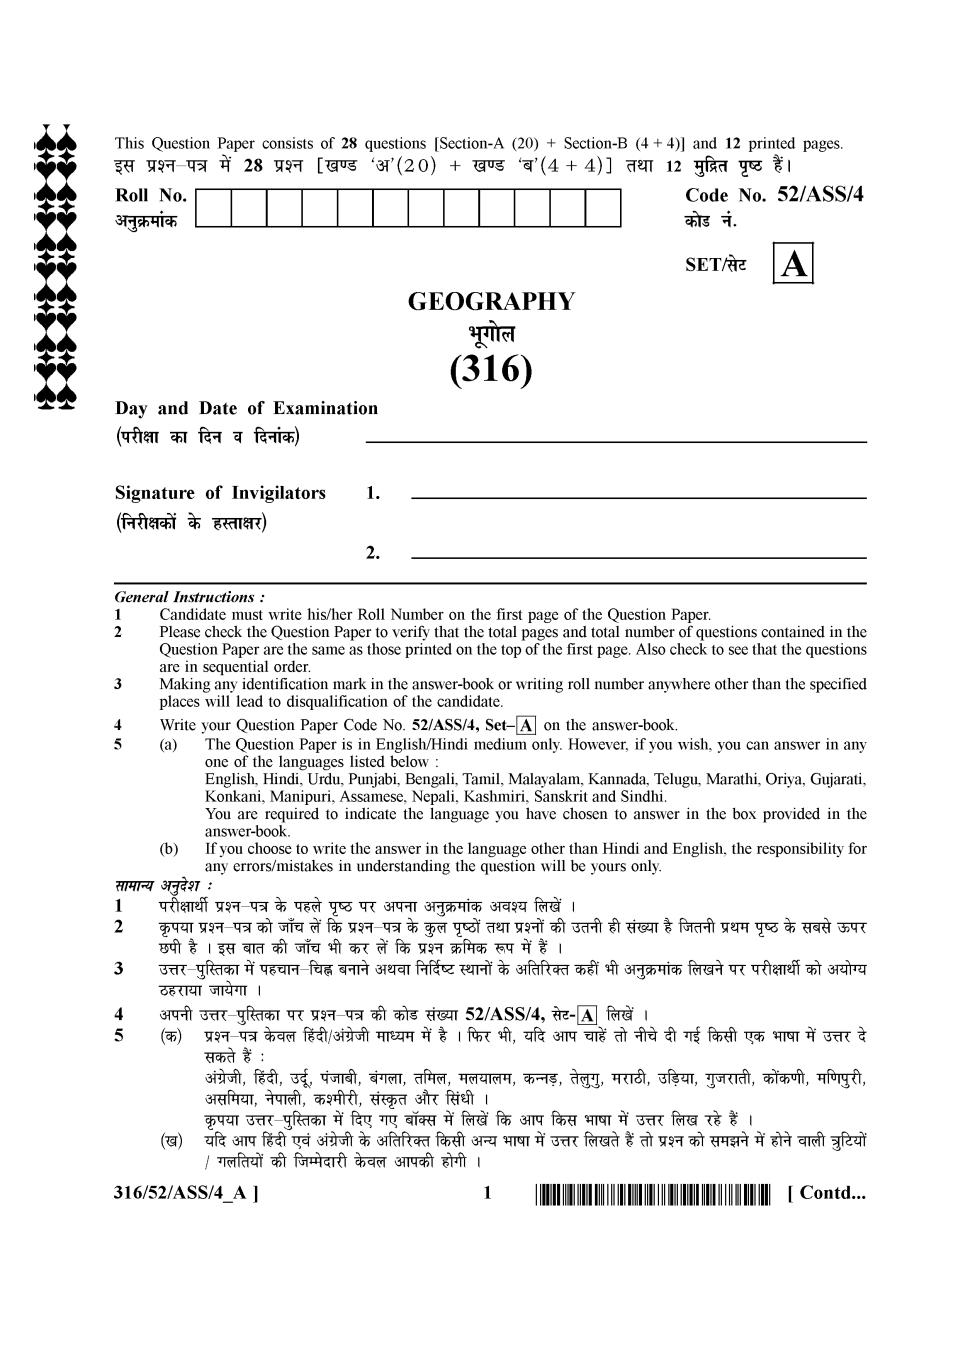 NIOS Class 12 Question Paper Apr 2016 - Geography - Page 1